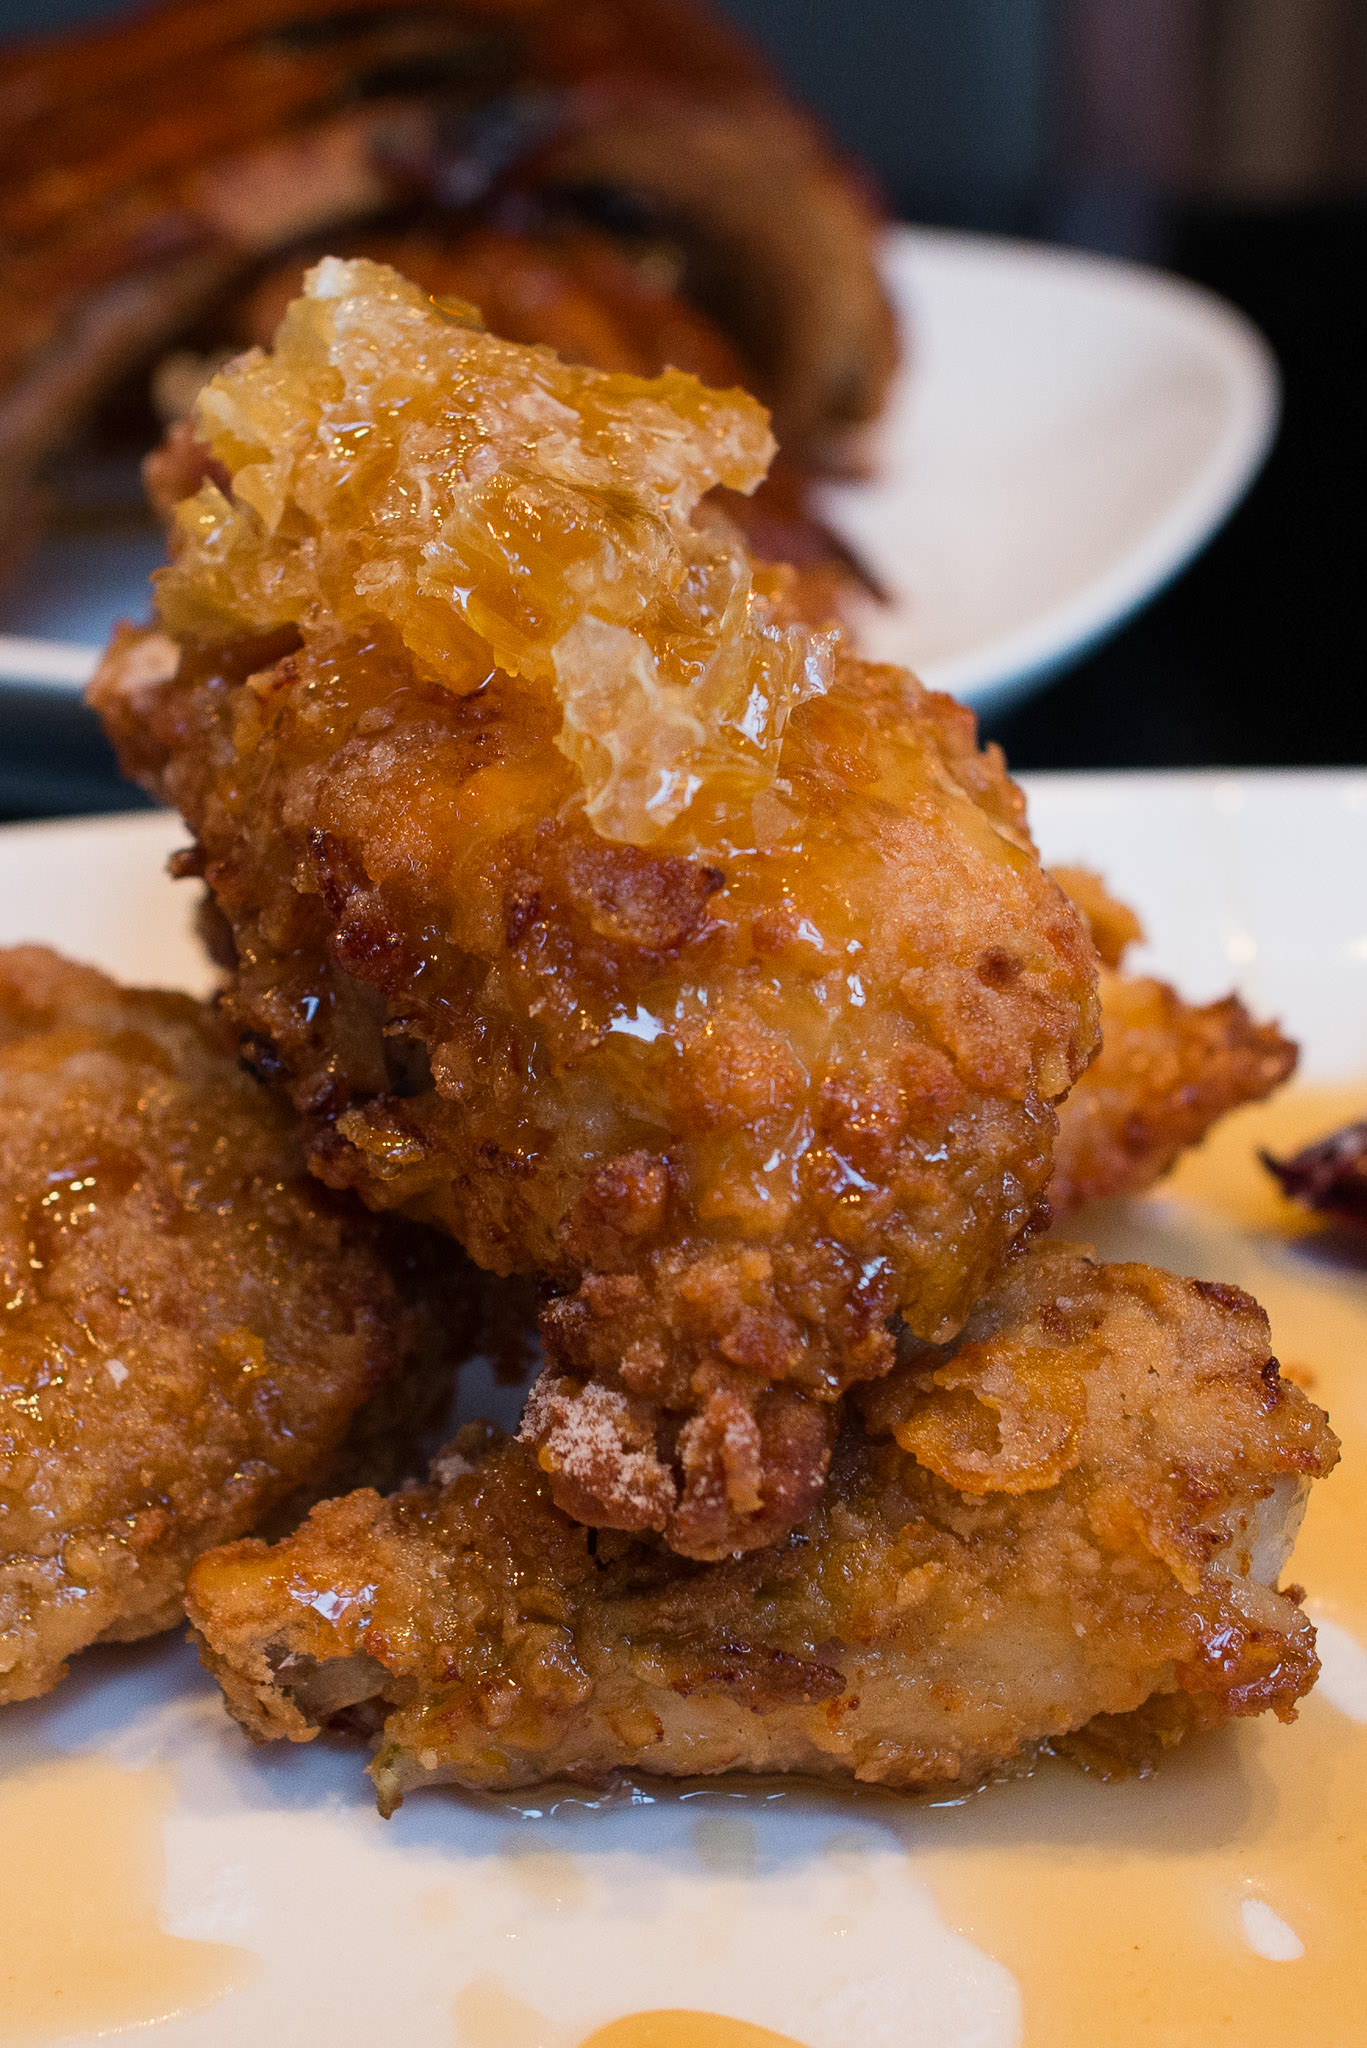 Fried chicken with Killer Bee honey